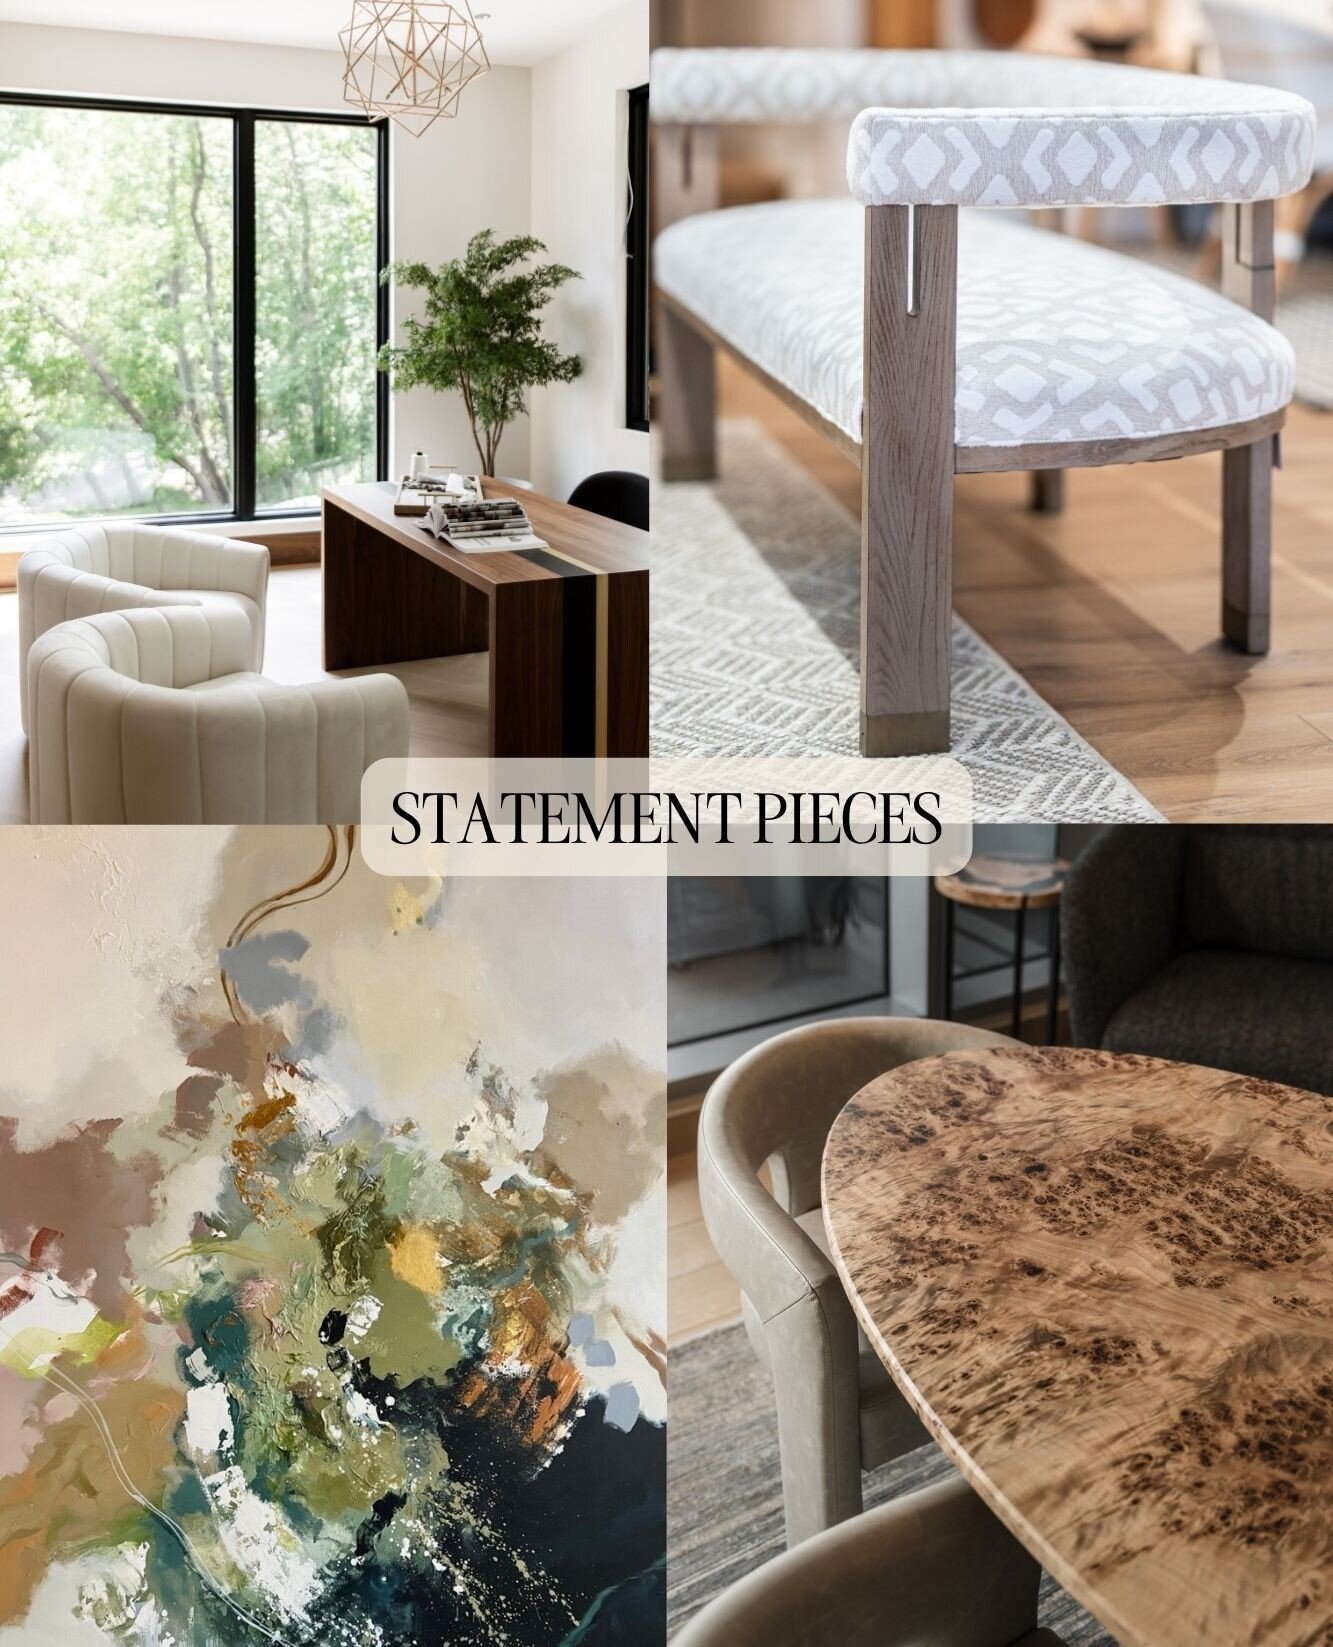 Can we all agree that dull furniture is sooo last year! Make your home the talk of the town with statement pieces that spark joy and ignite conversation.⁠
⁠
Let us help you find a piece that reflects your style and adds personality to your space. Mes